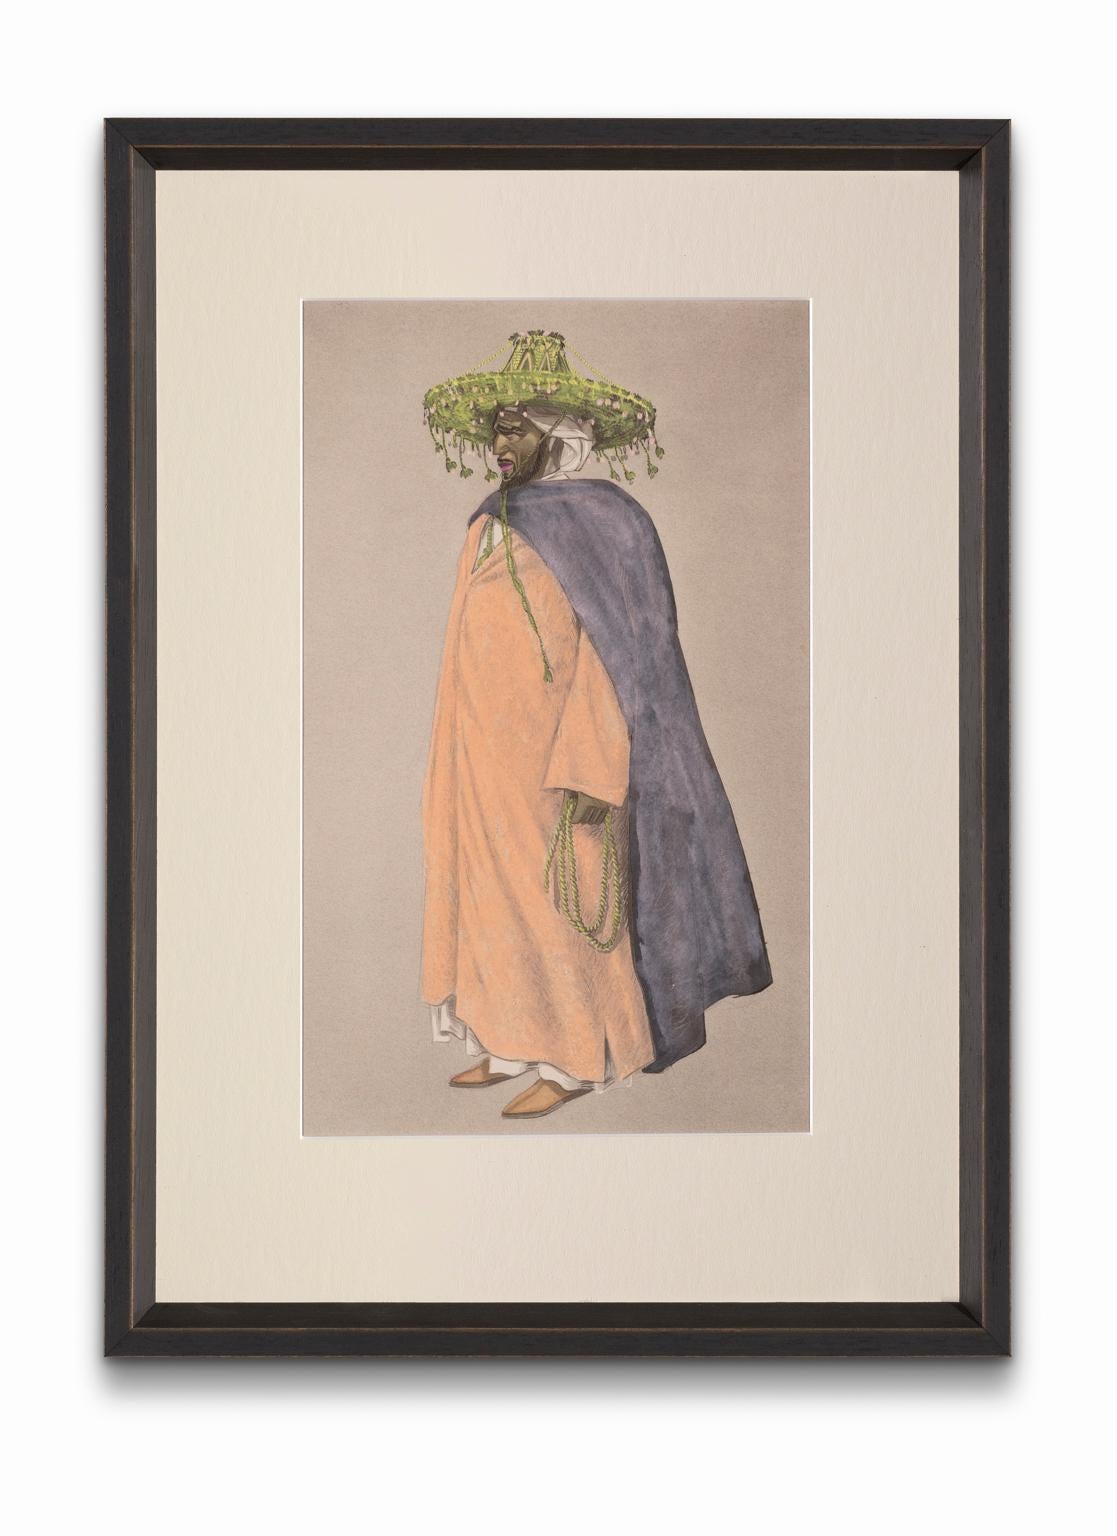 Jean Besancenot Portrait Print - "Man of the Zemmour" from "Costumes of Morocco", Gouache on Paper